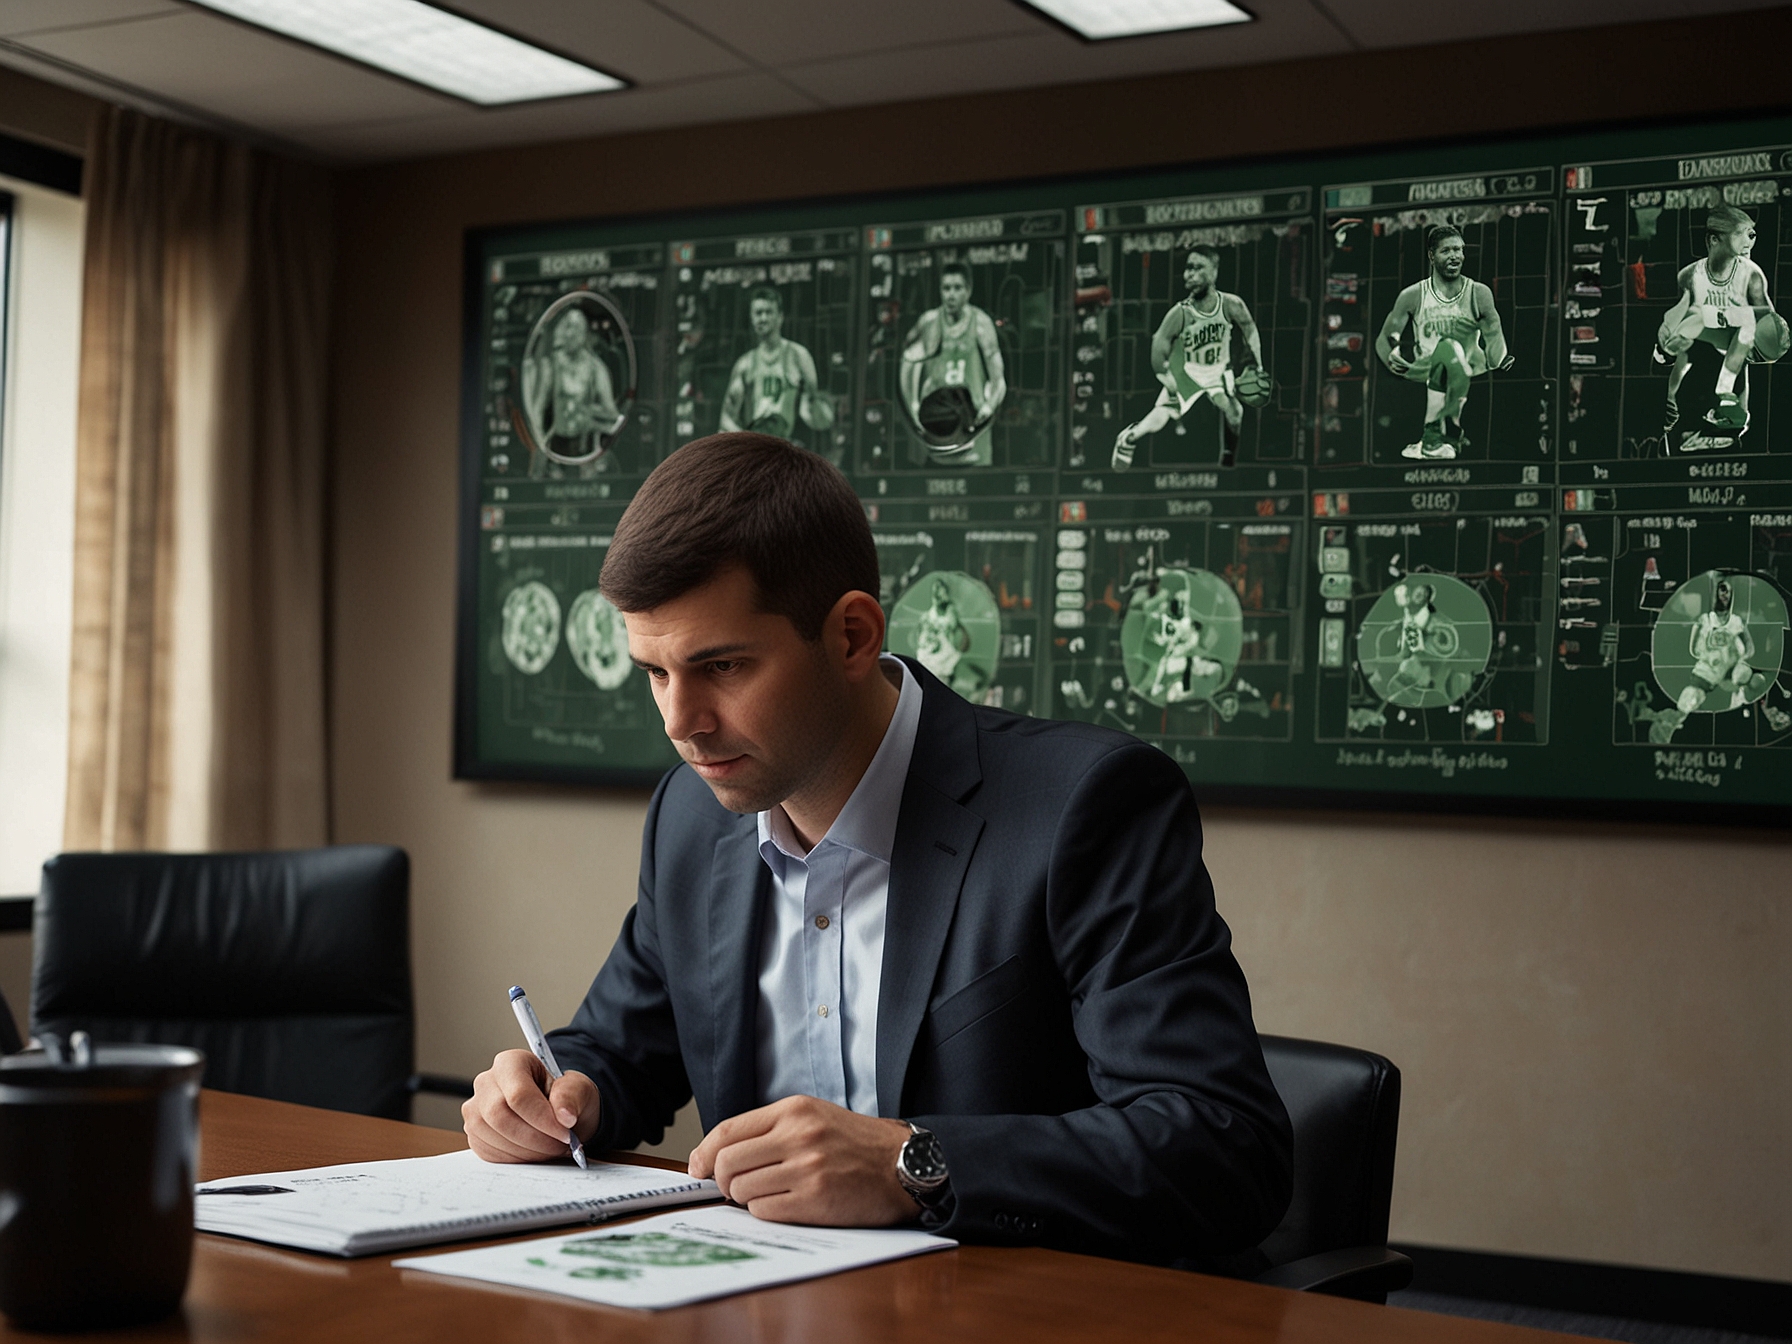 Brad Stevens, in a boardroom, analyzing player stats and data on multiple screens, emphasizing his analytical approach to building the Celtics' roster for sustained success.